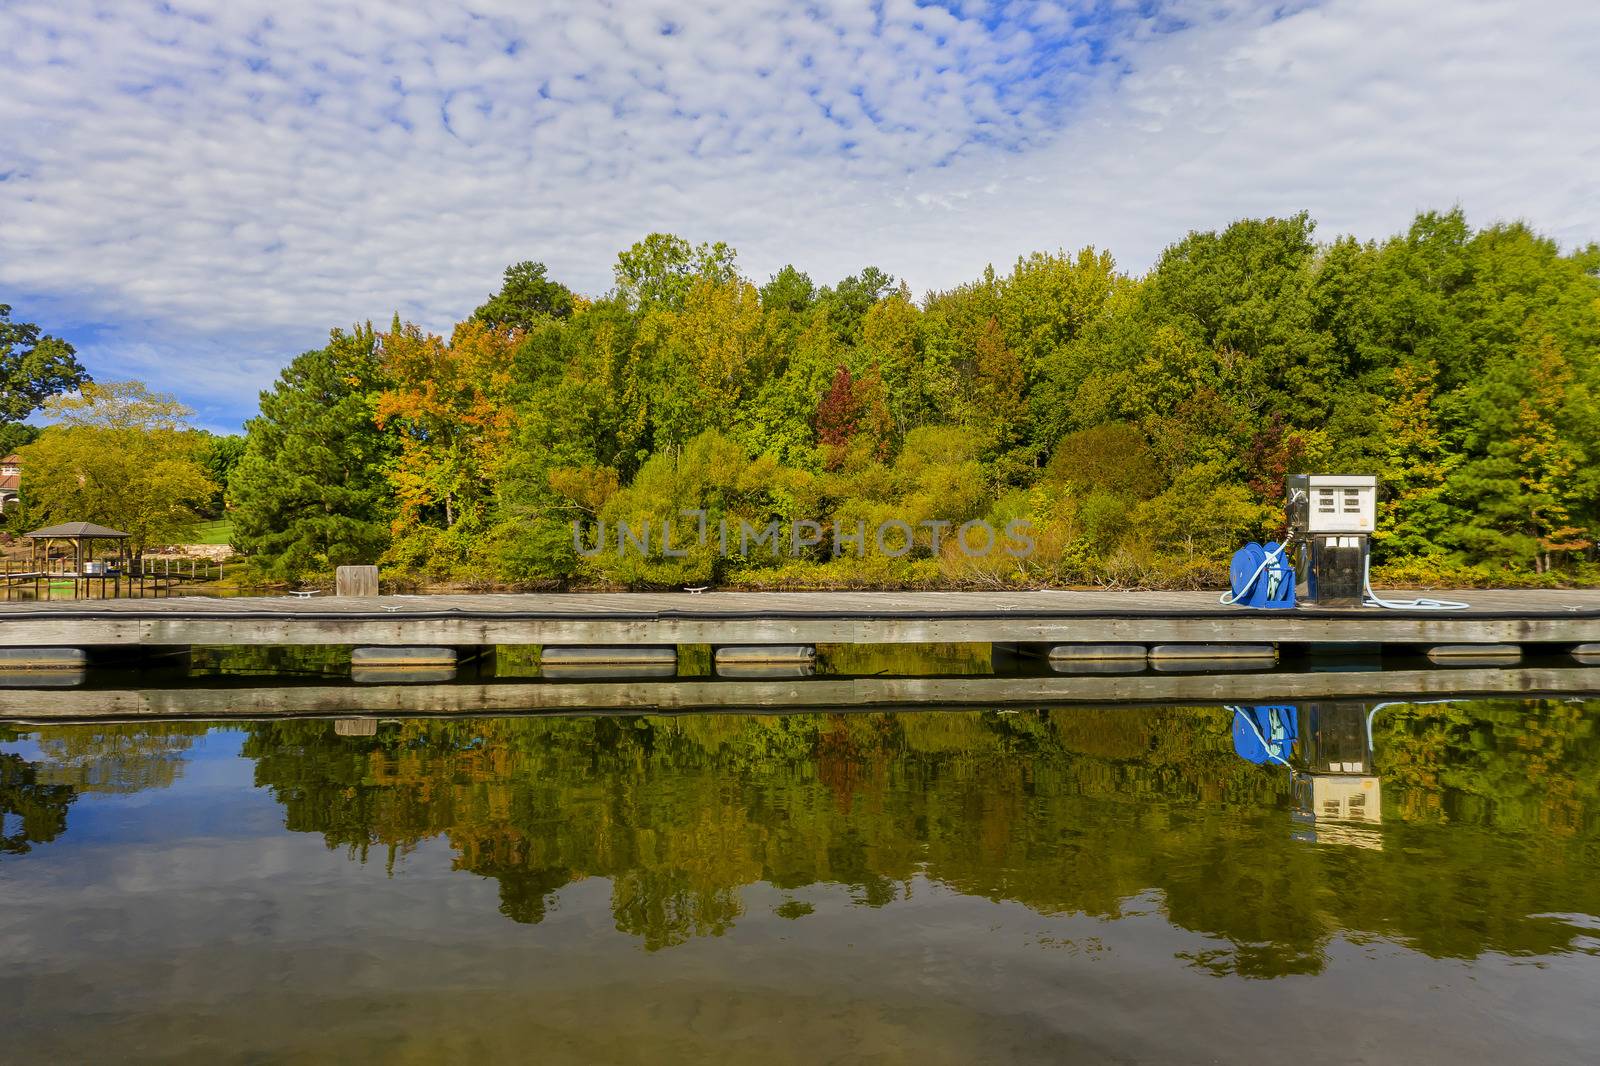 Generic View Of A Local Lake On An Autumn Day by actionsports